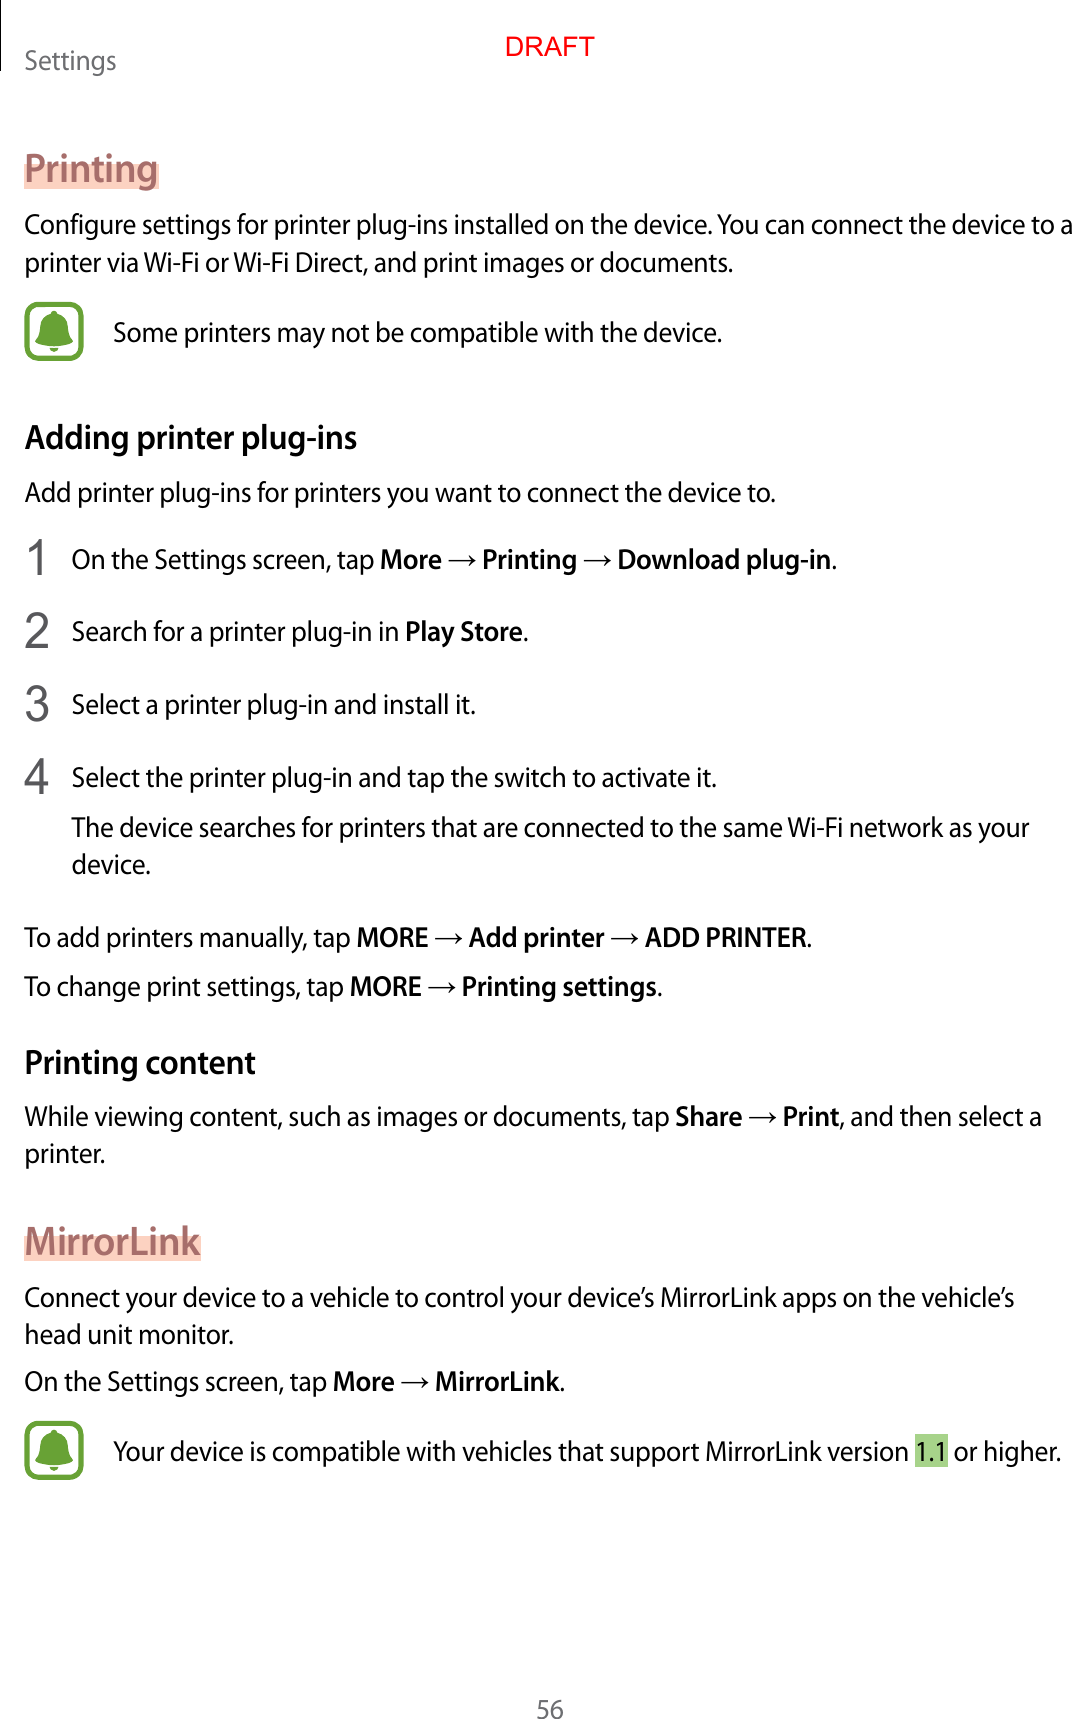 Settings56PrintingConfigure settings for printer plug-ins installed on the device. You can connect the device to a printer via Wi-Fi or Wi-Fi Direct, and print images or documents.Some printers may not be compatible with the device.Adding printer plug-insAdd printer plug-ins for printers you want to connect the device to.1  On the Settings screen, tap More → Printing → Download plug-in.2  Search for a printer plug-in in Play Store.3  Select a printer plug-in and install it.4  Select the printer plug-in and tap the switch to activate it.The device searches for printers that are connected to the same Wi-Fi network as your device.To add printers manually, tap MORE → Add printer → ADD PRINTER.To change print settings, tap MORE → Printing settings.Printing contentWhile viewing content, such as images or documents, tap Share → Print, and then select a printer.MirrorLinkConnect your device to a vehicle to control your device’s MirrorLink apps on the vehicle’s head unit monitor.On the Settings screen, tap More → MirrorLink.Your device is compatible with vehicles that support MirrorLink version 1.1 or higher.DRAFT